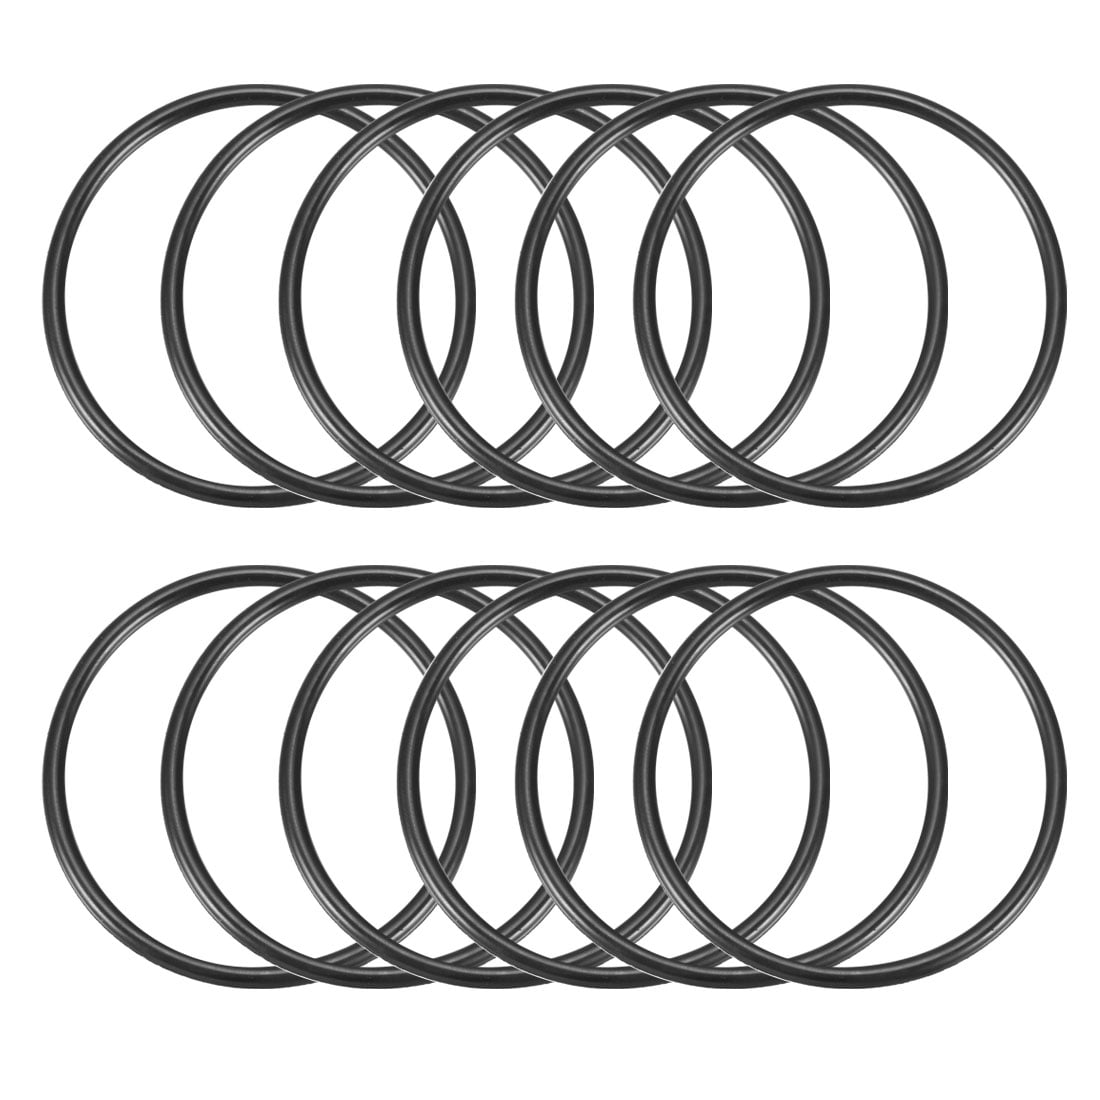 12 Pcs 65mm x 58mm x 3.5mm Rubber Oil Sealing O Rings for Mechanical 